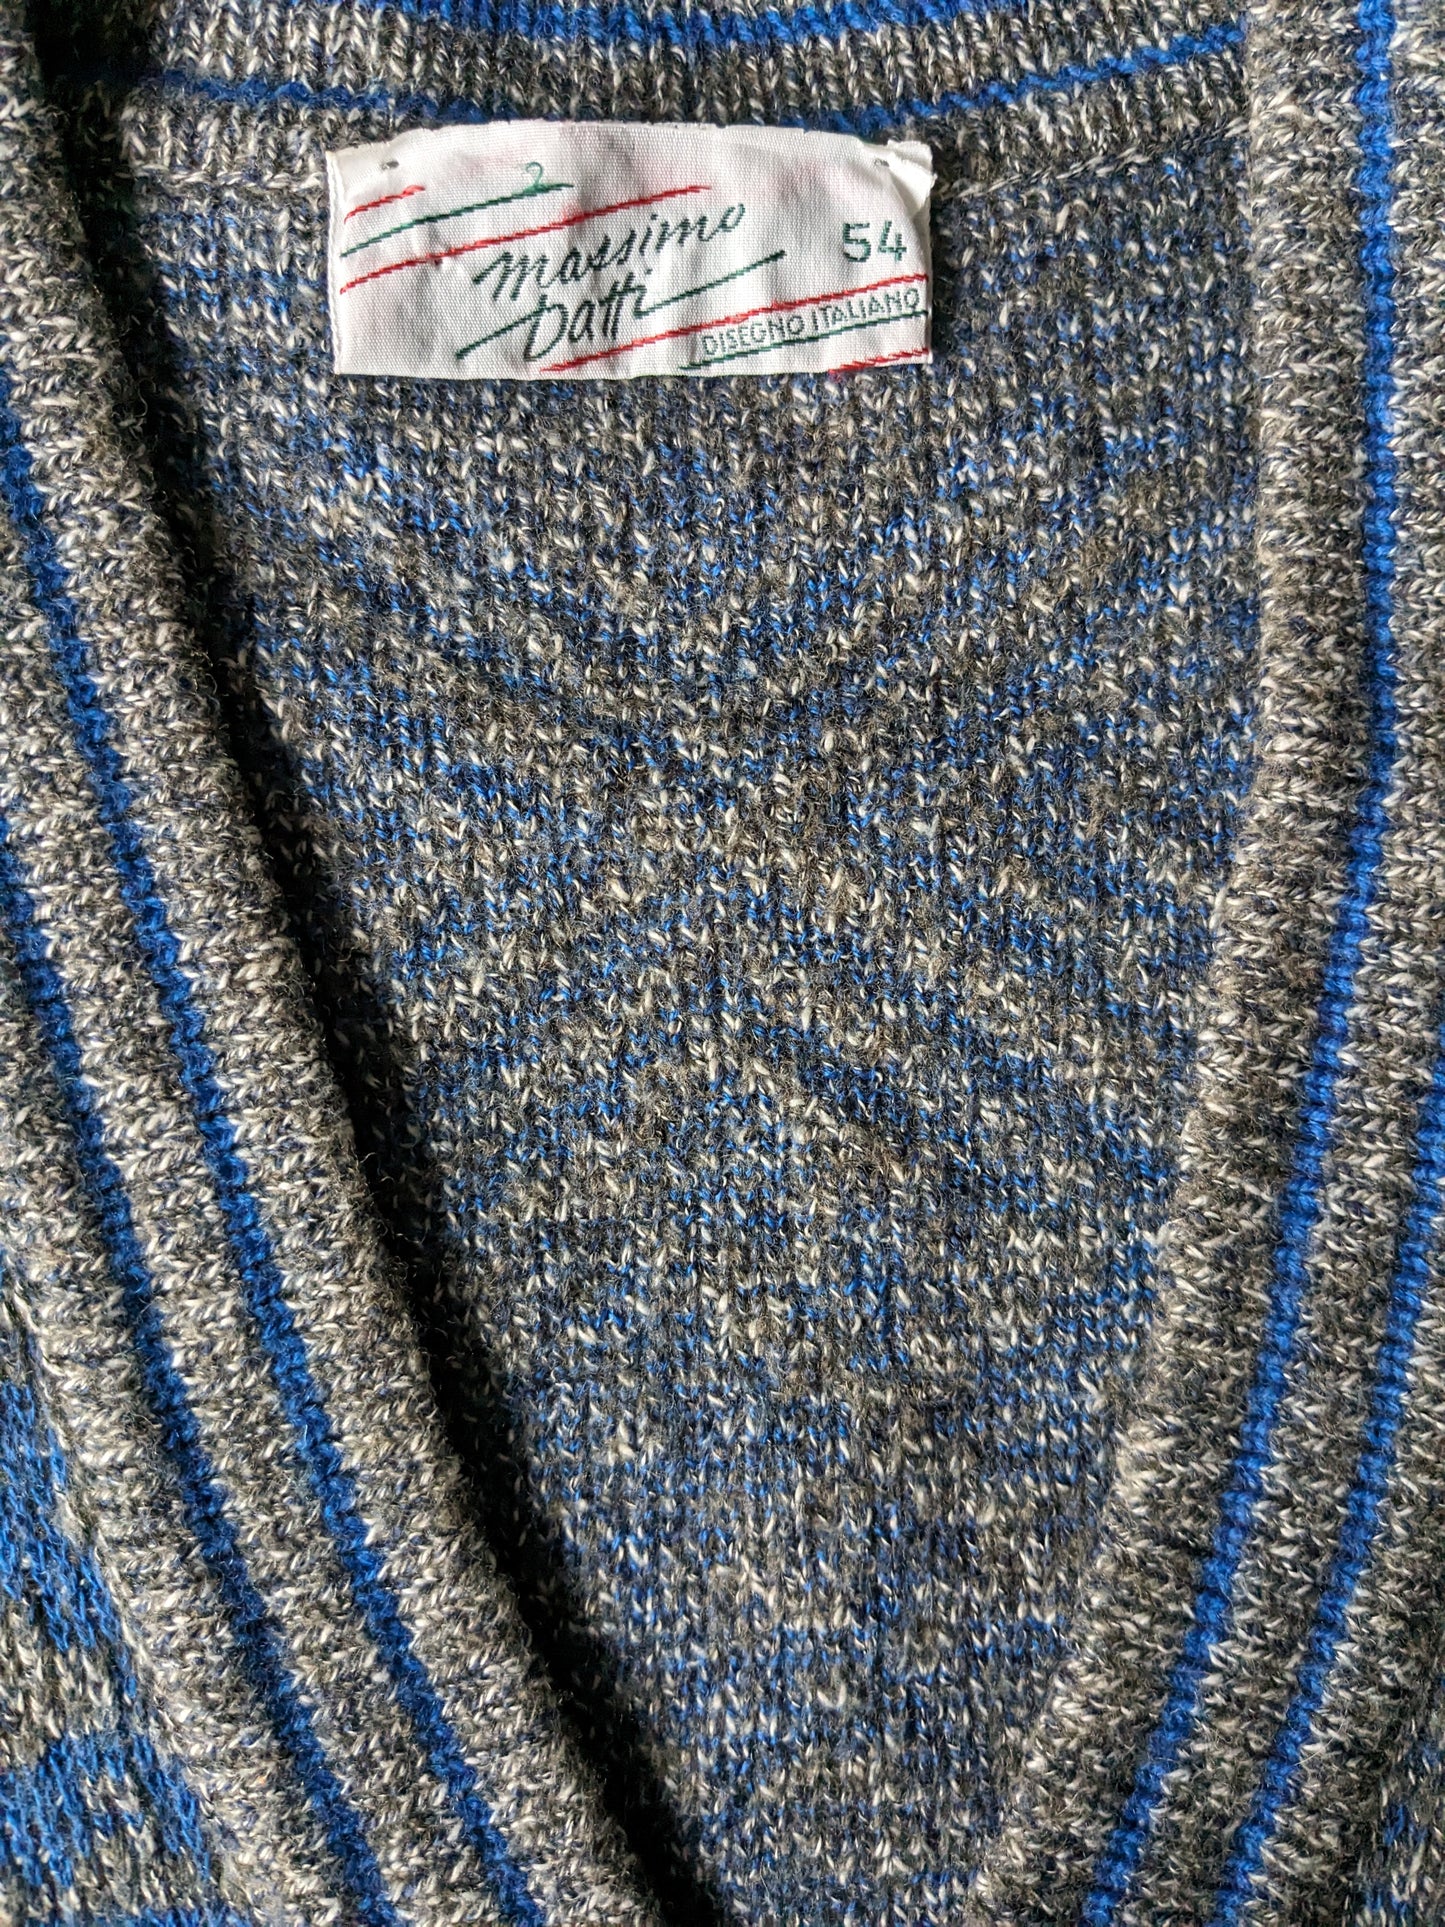 Vintage Massimo dati sweater with v-neck. Gray blue colored. Size L. (35% Wool)